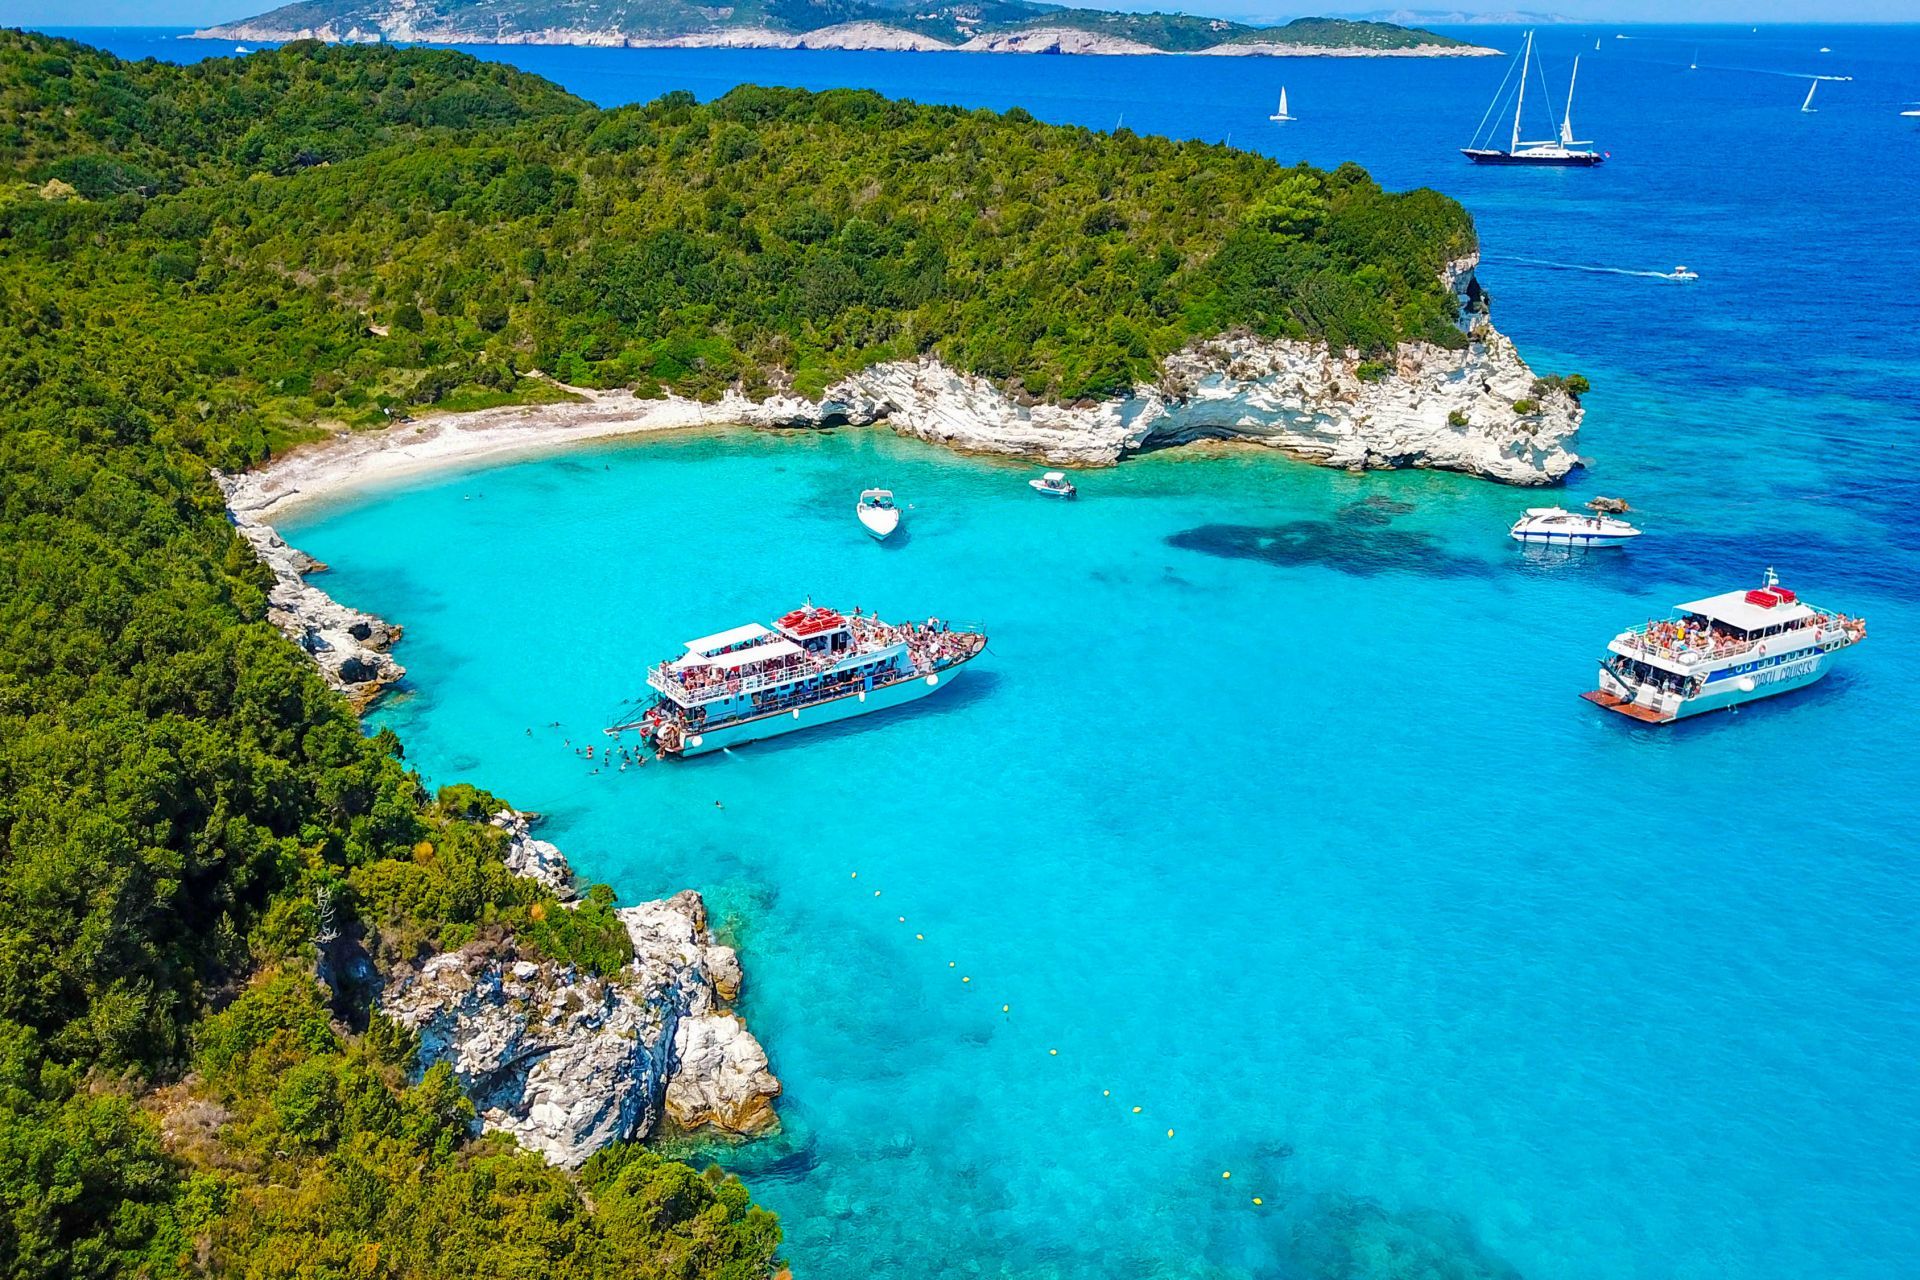 The exotic waters of Antipaxos